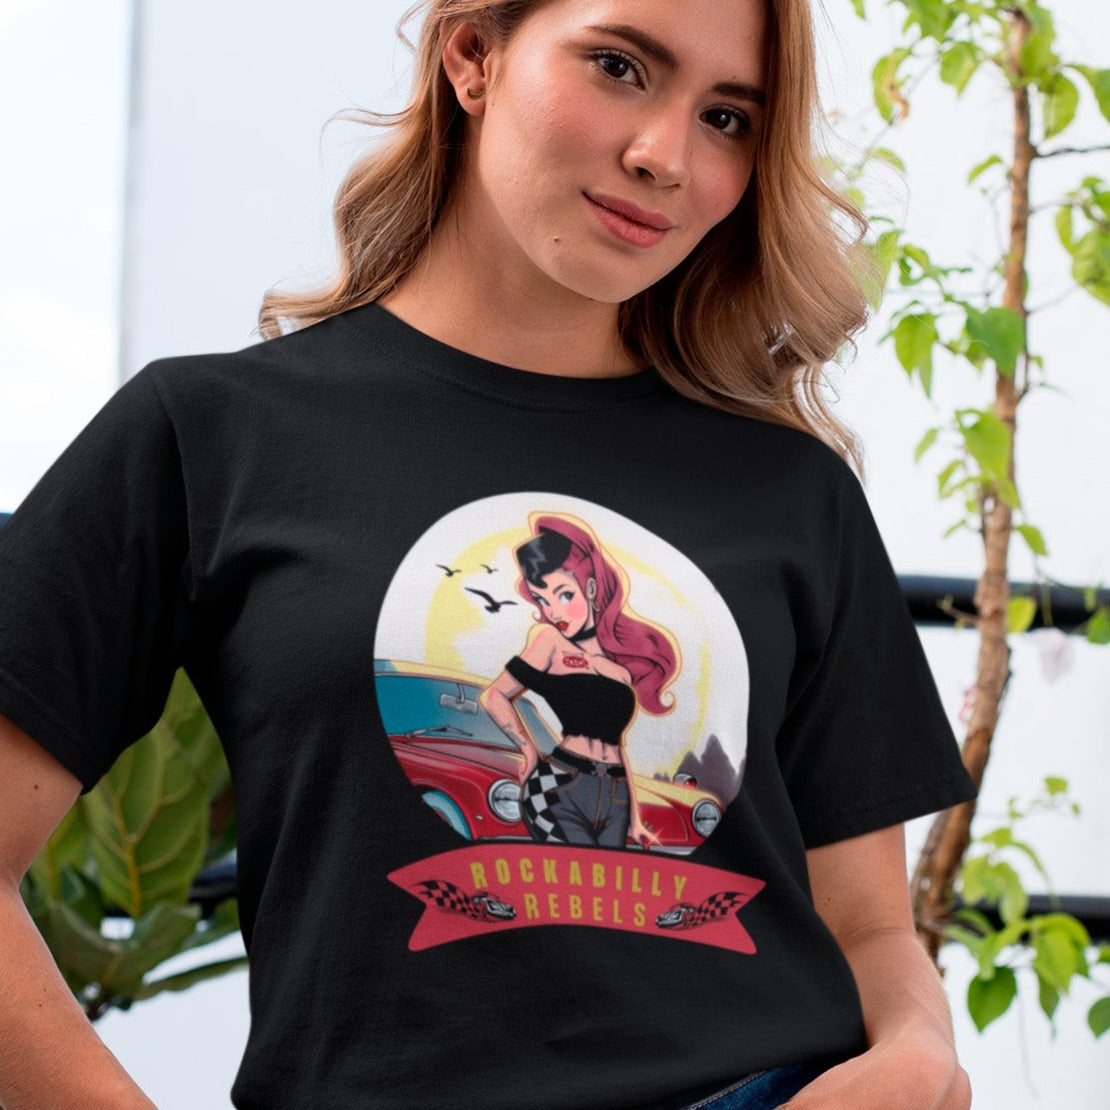 rockabilly-rebels-graphic-white-t-shirt-tee-mockup-of-a-girl-with-a-coy-smile-by-a-balcony